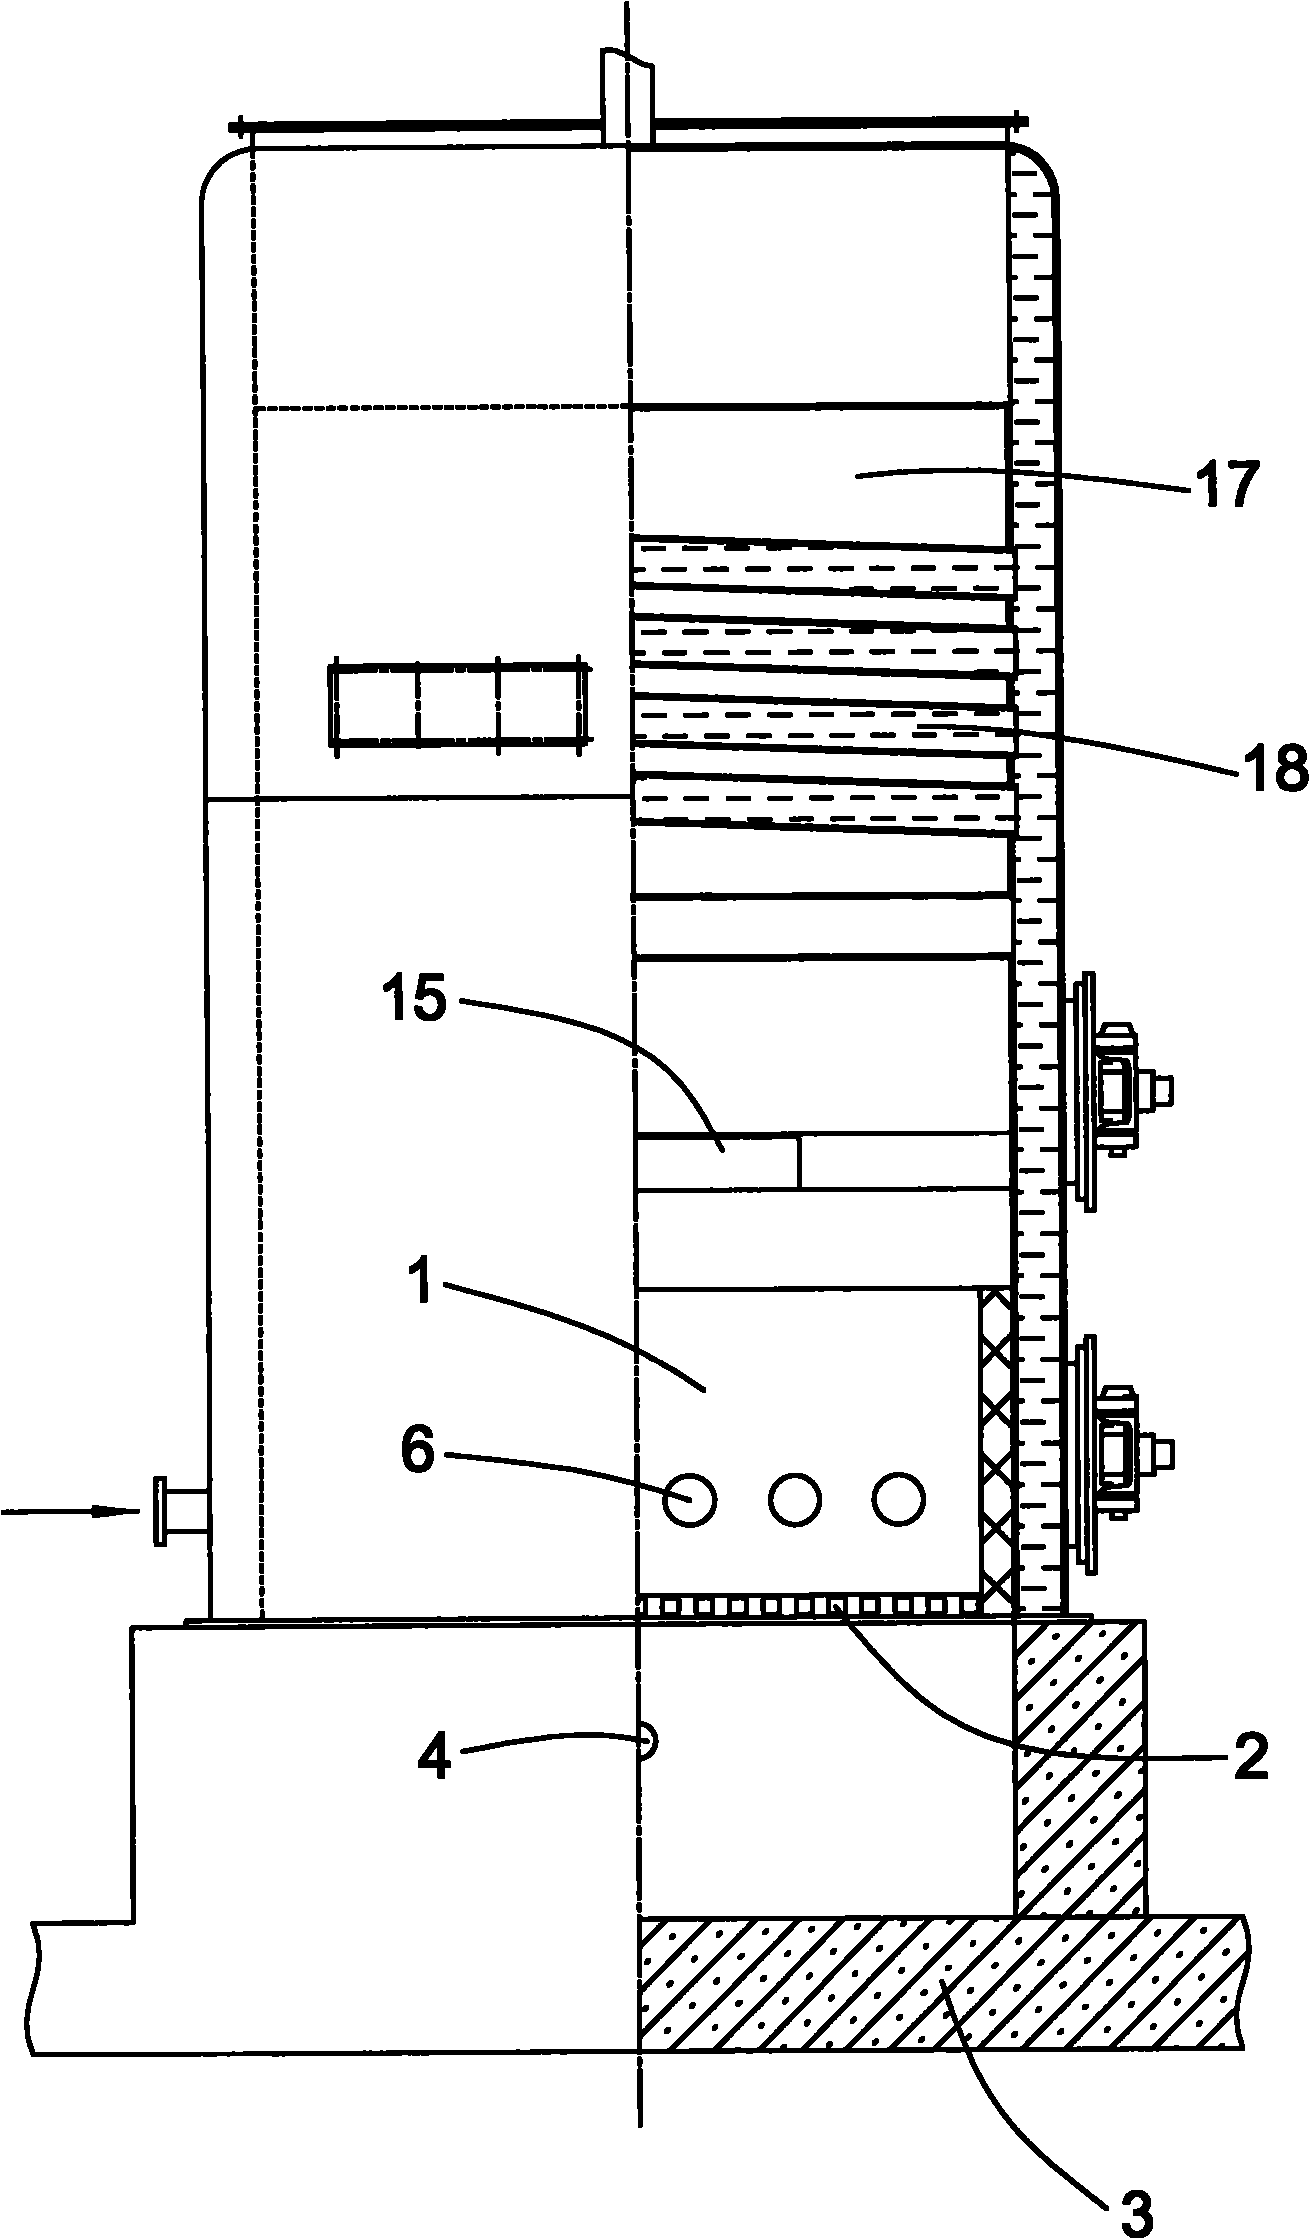 Coal-fired gasification swirl combustion furnace